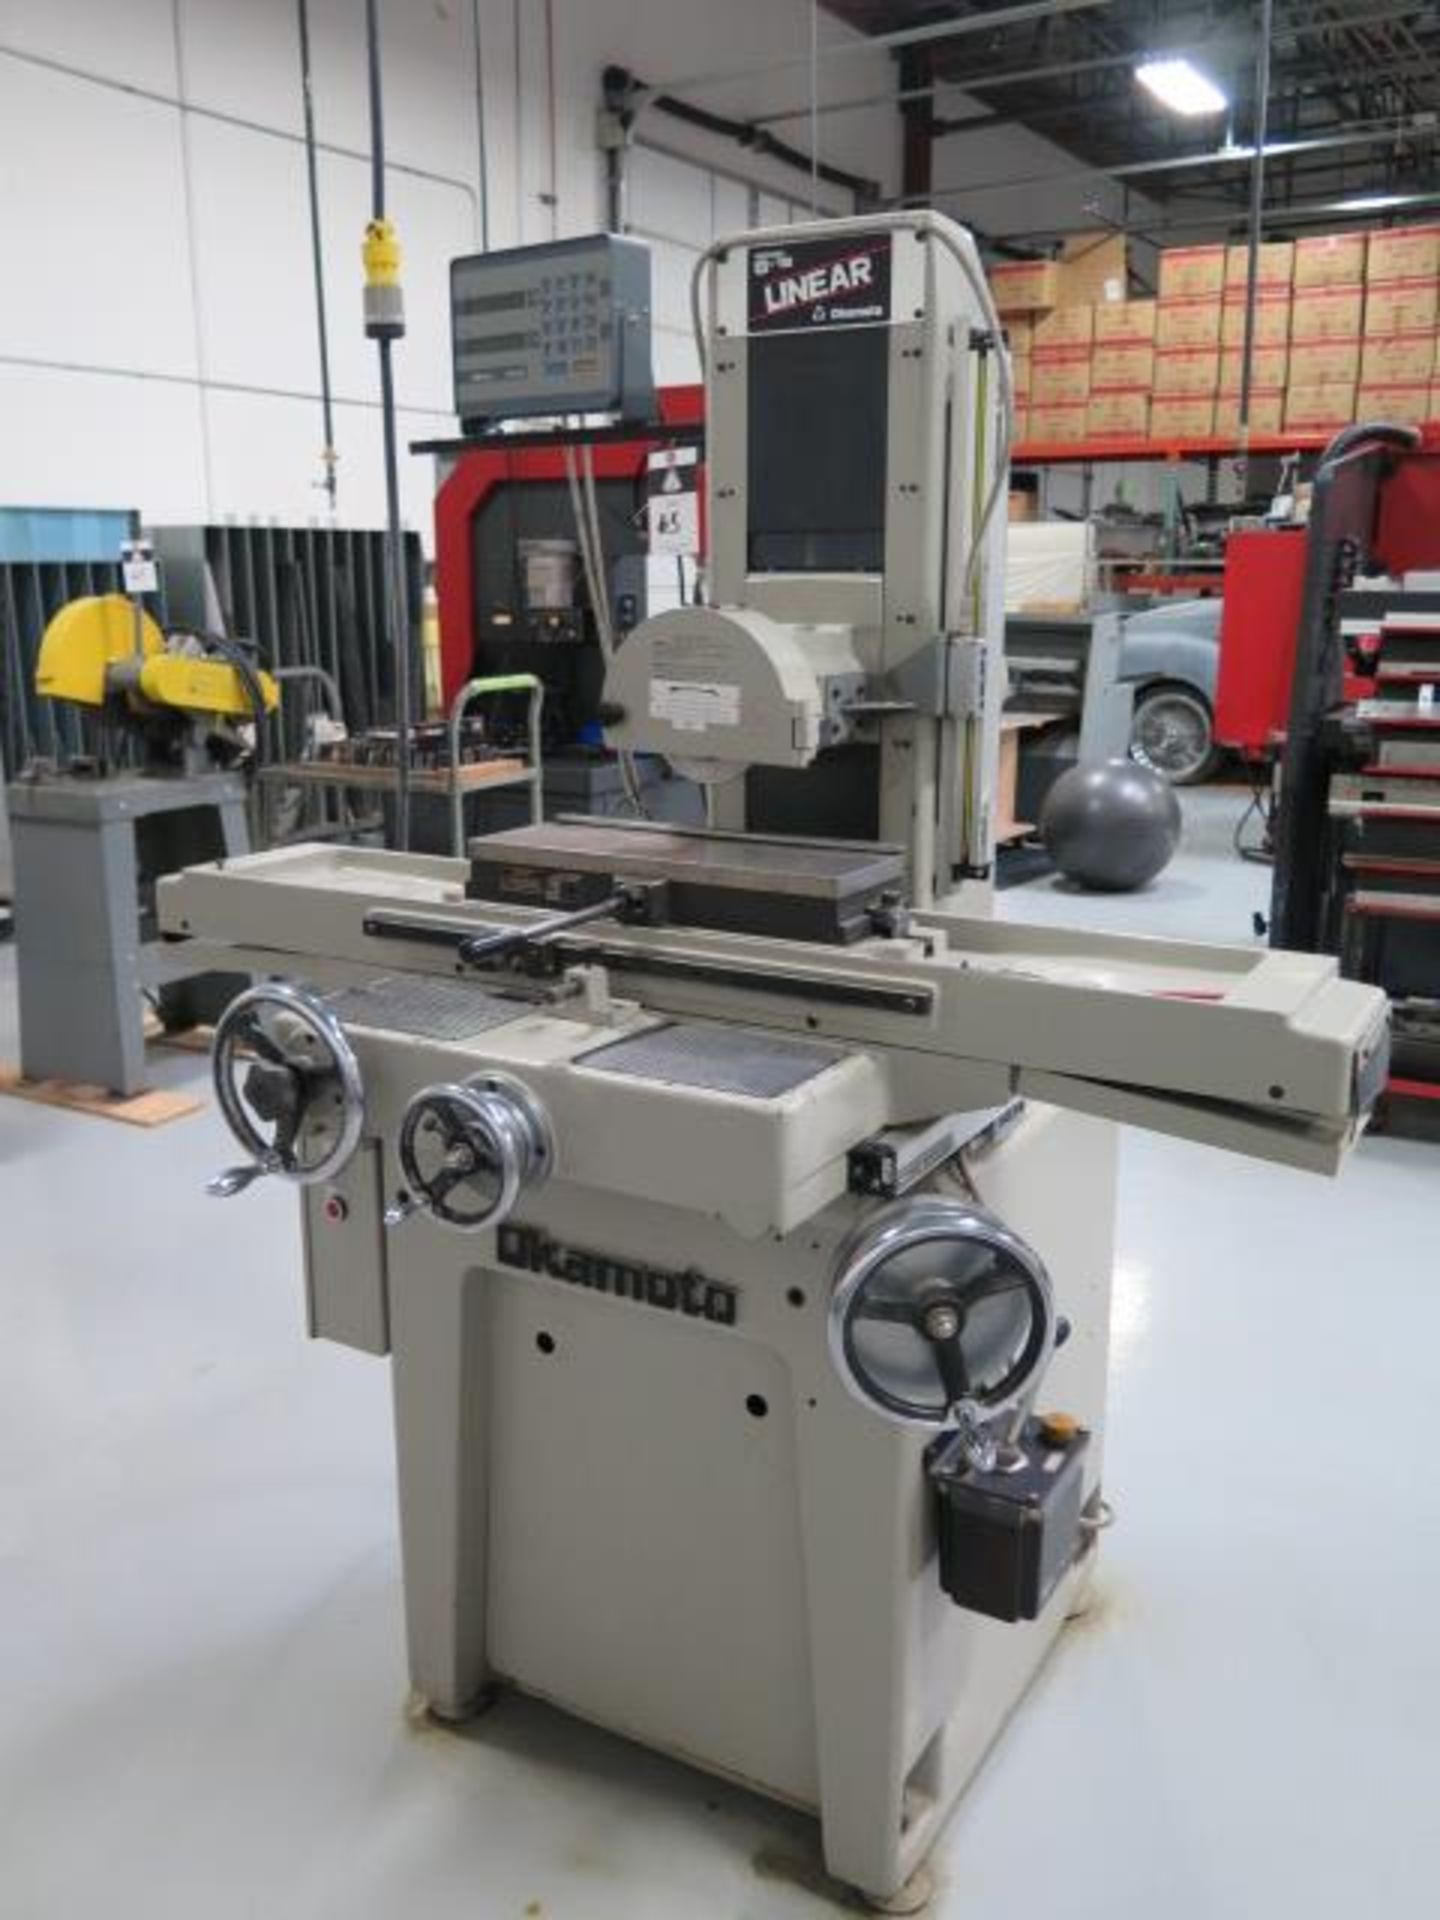 Okamoto “6-18 LINEAR” 6” x 18” Surface Grinder s/n 4469 w/ Mitutoyo UDR-220 Program DRO, SOLD AS IS - Image 2 of 15